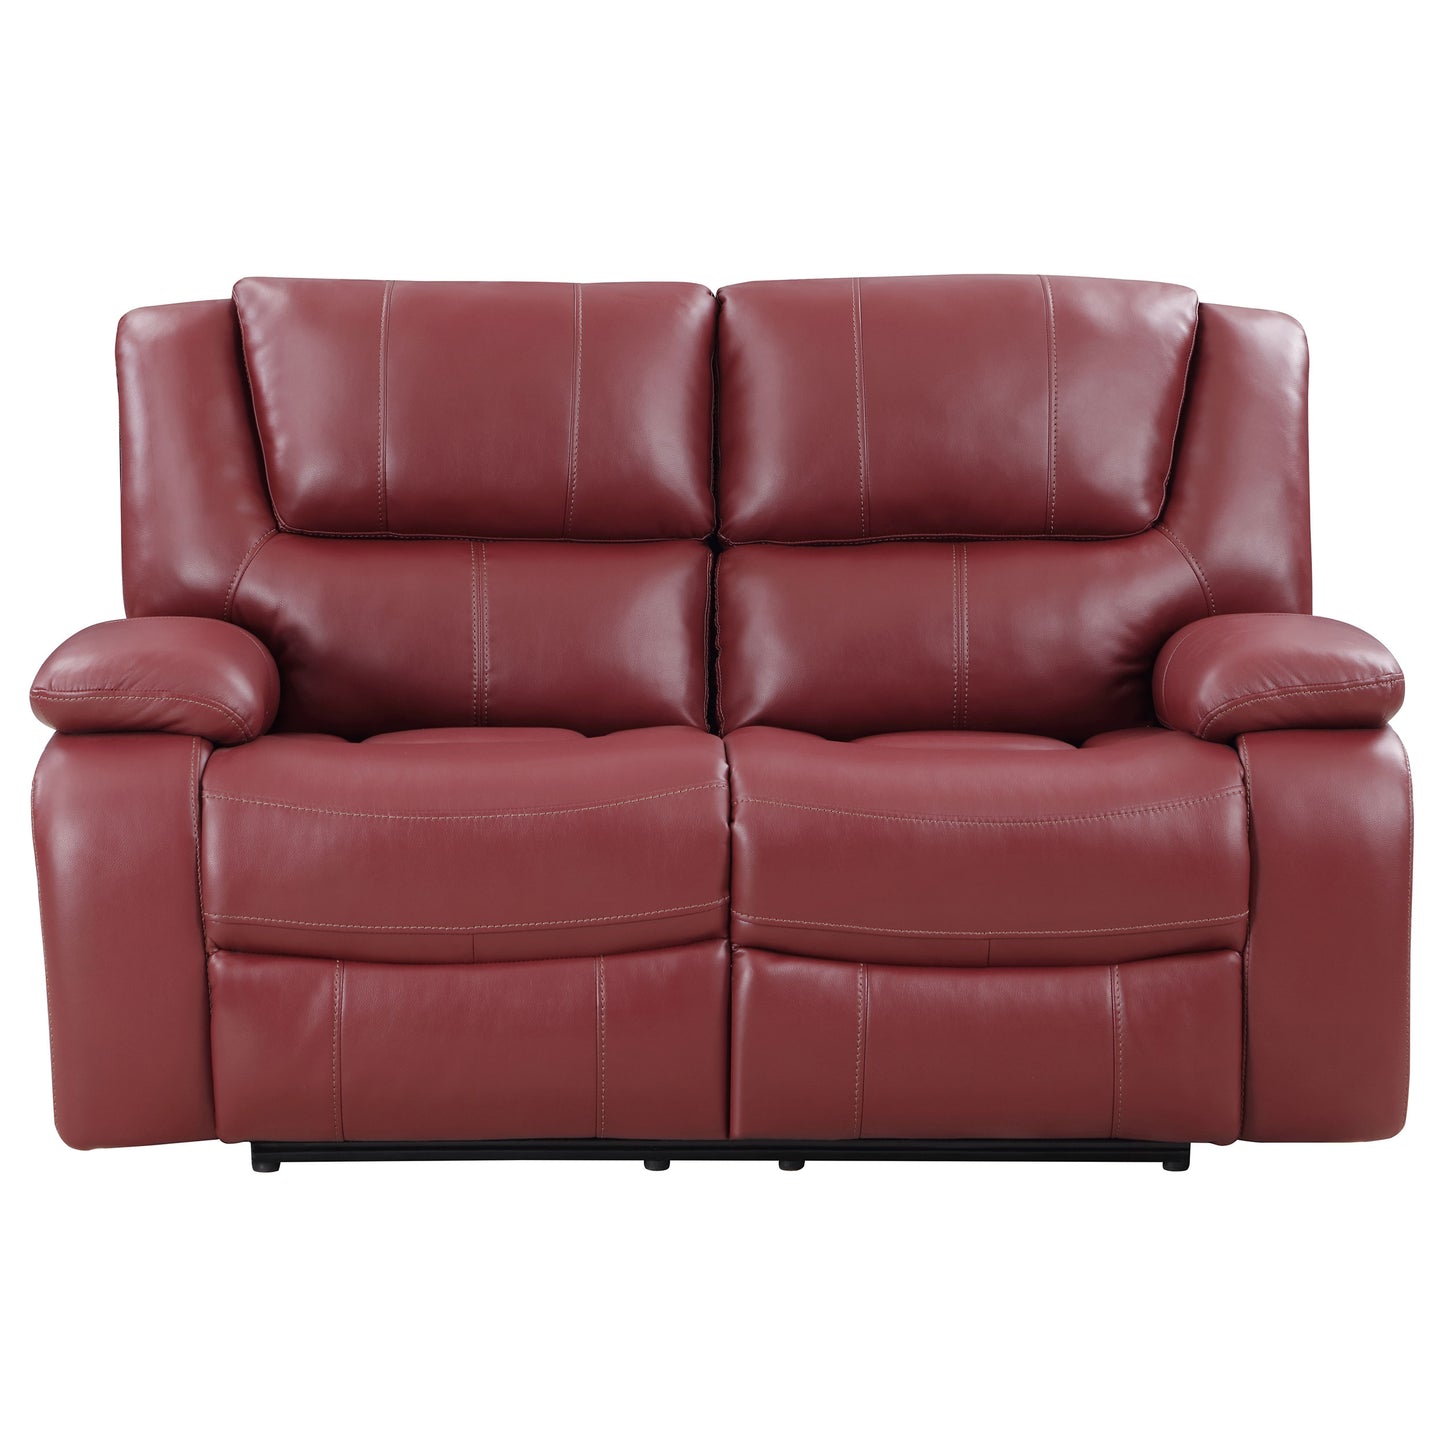 Camila 3-piece Upholstered Reclining Sofa Set Red